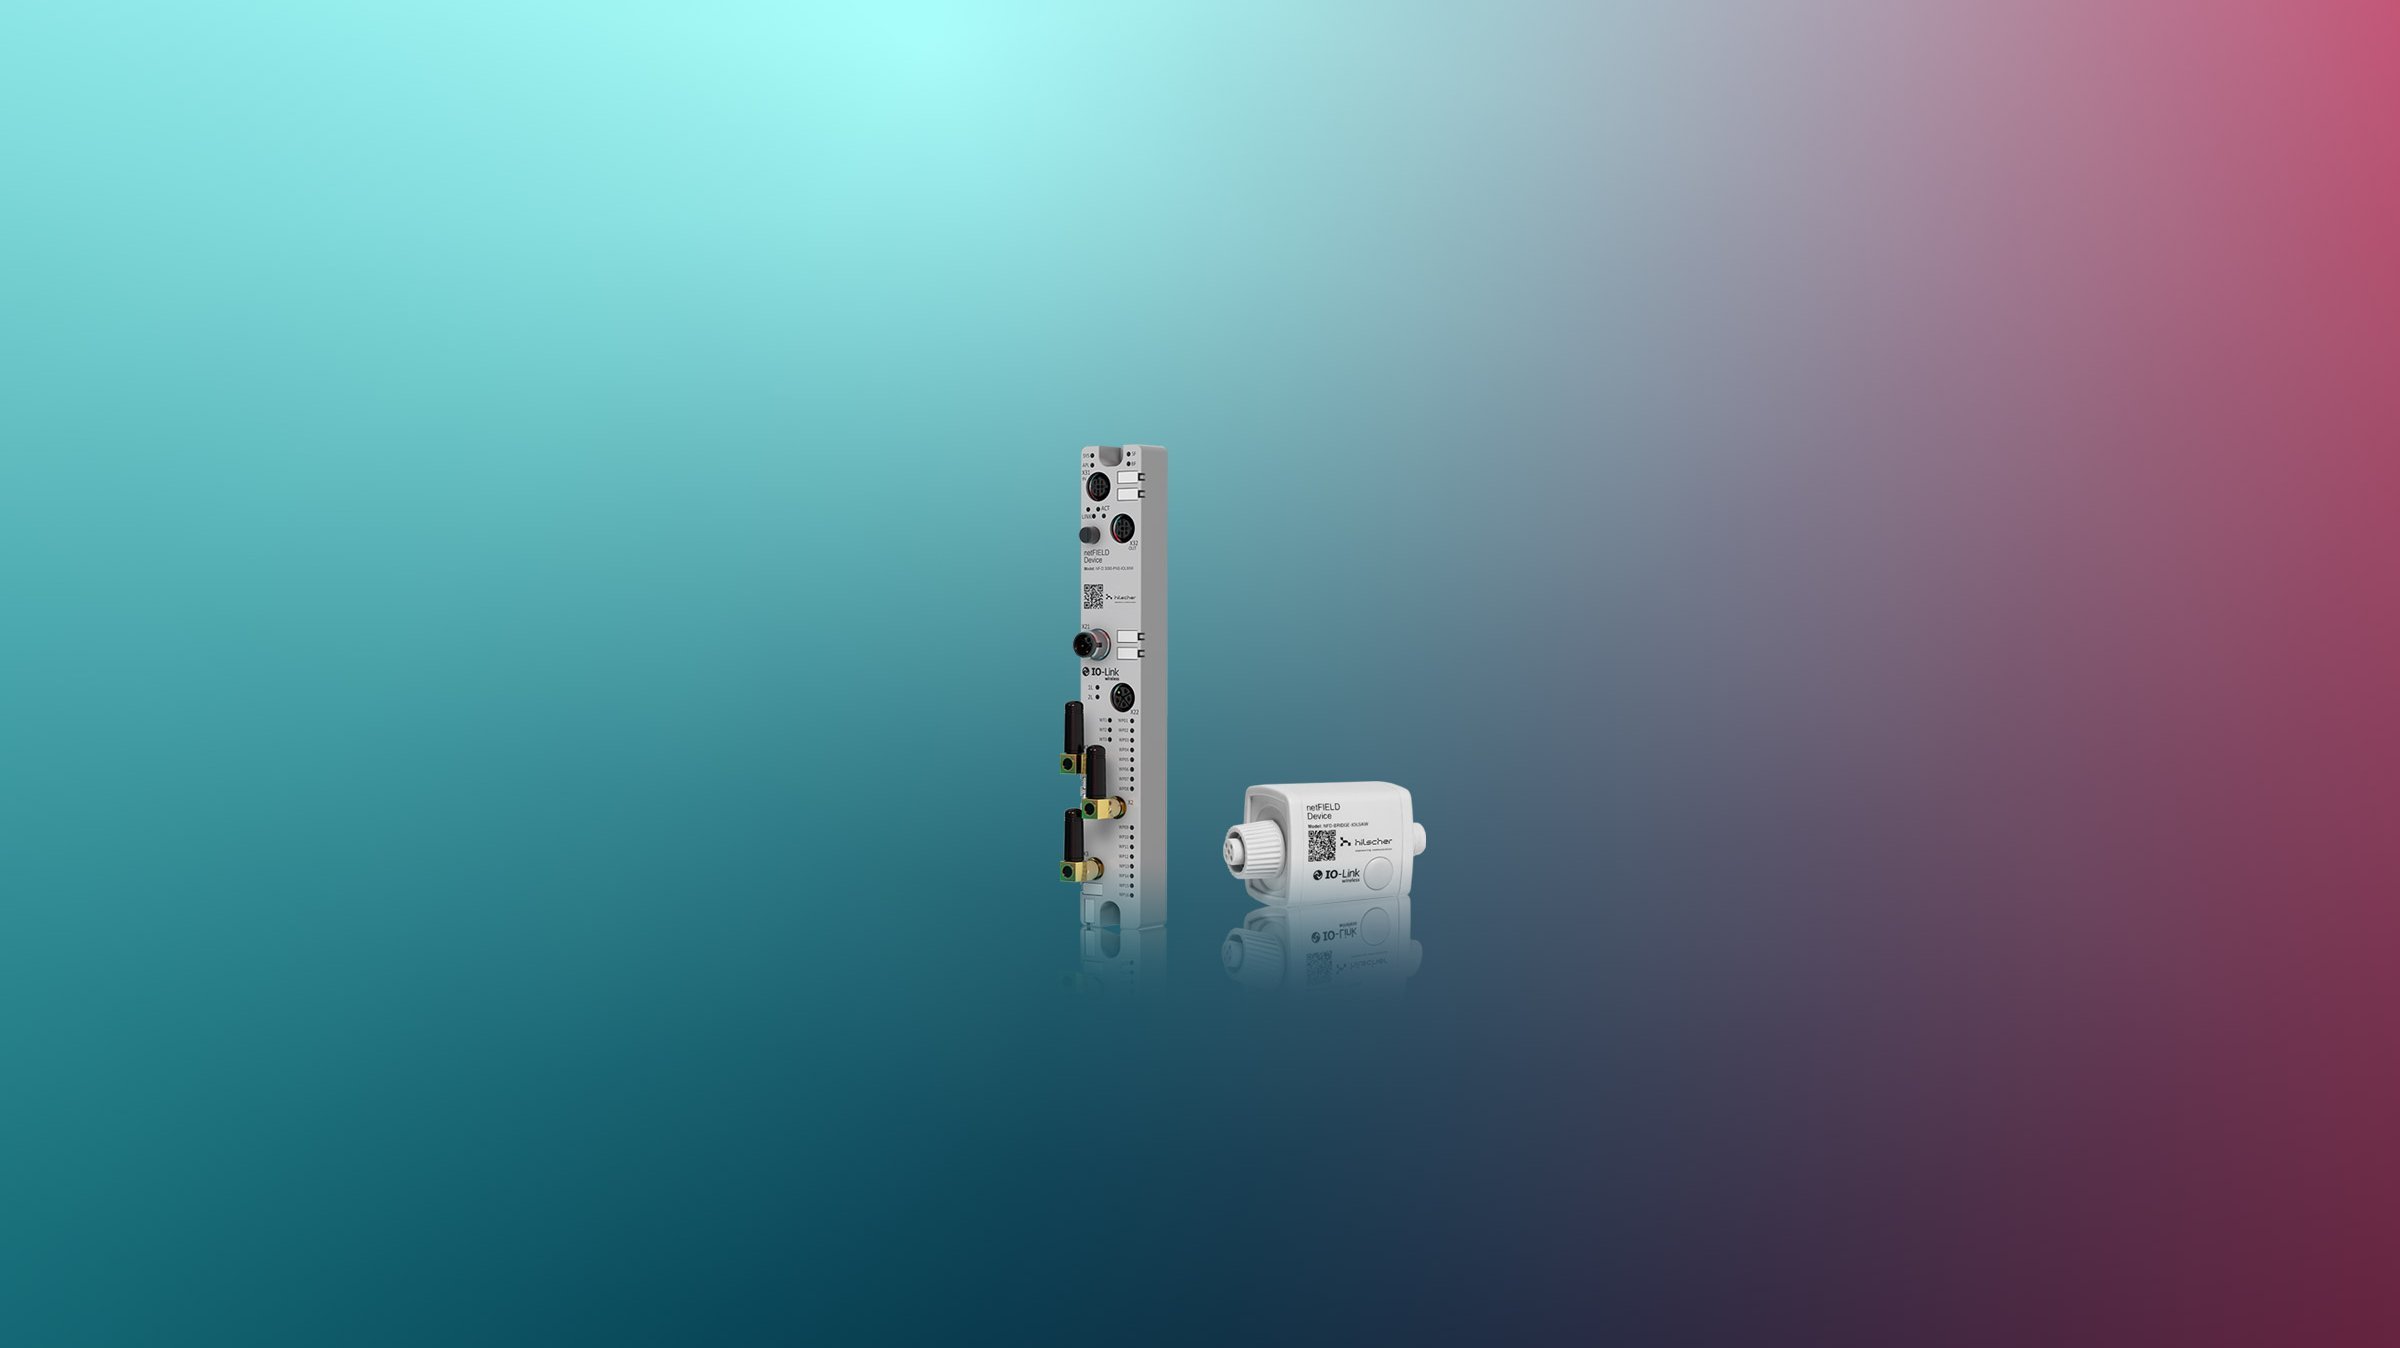 An IO-Link Wireless Master and a Bridge on a colorful background. Both devices are mainly grey and are slightly mirrored on the bottom.